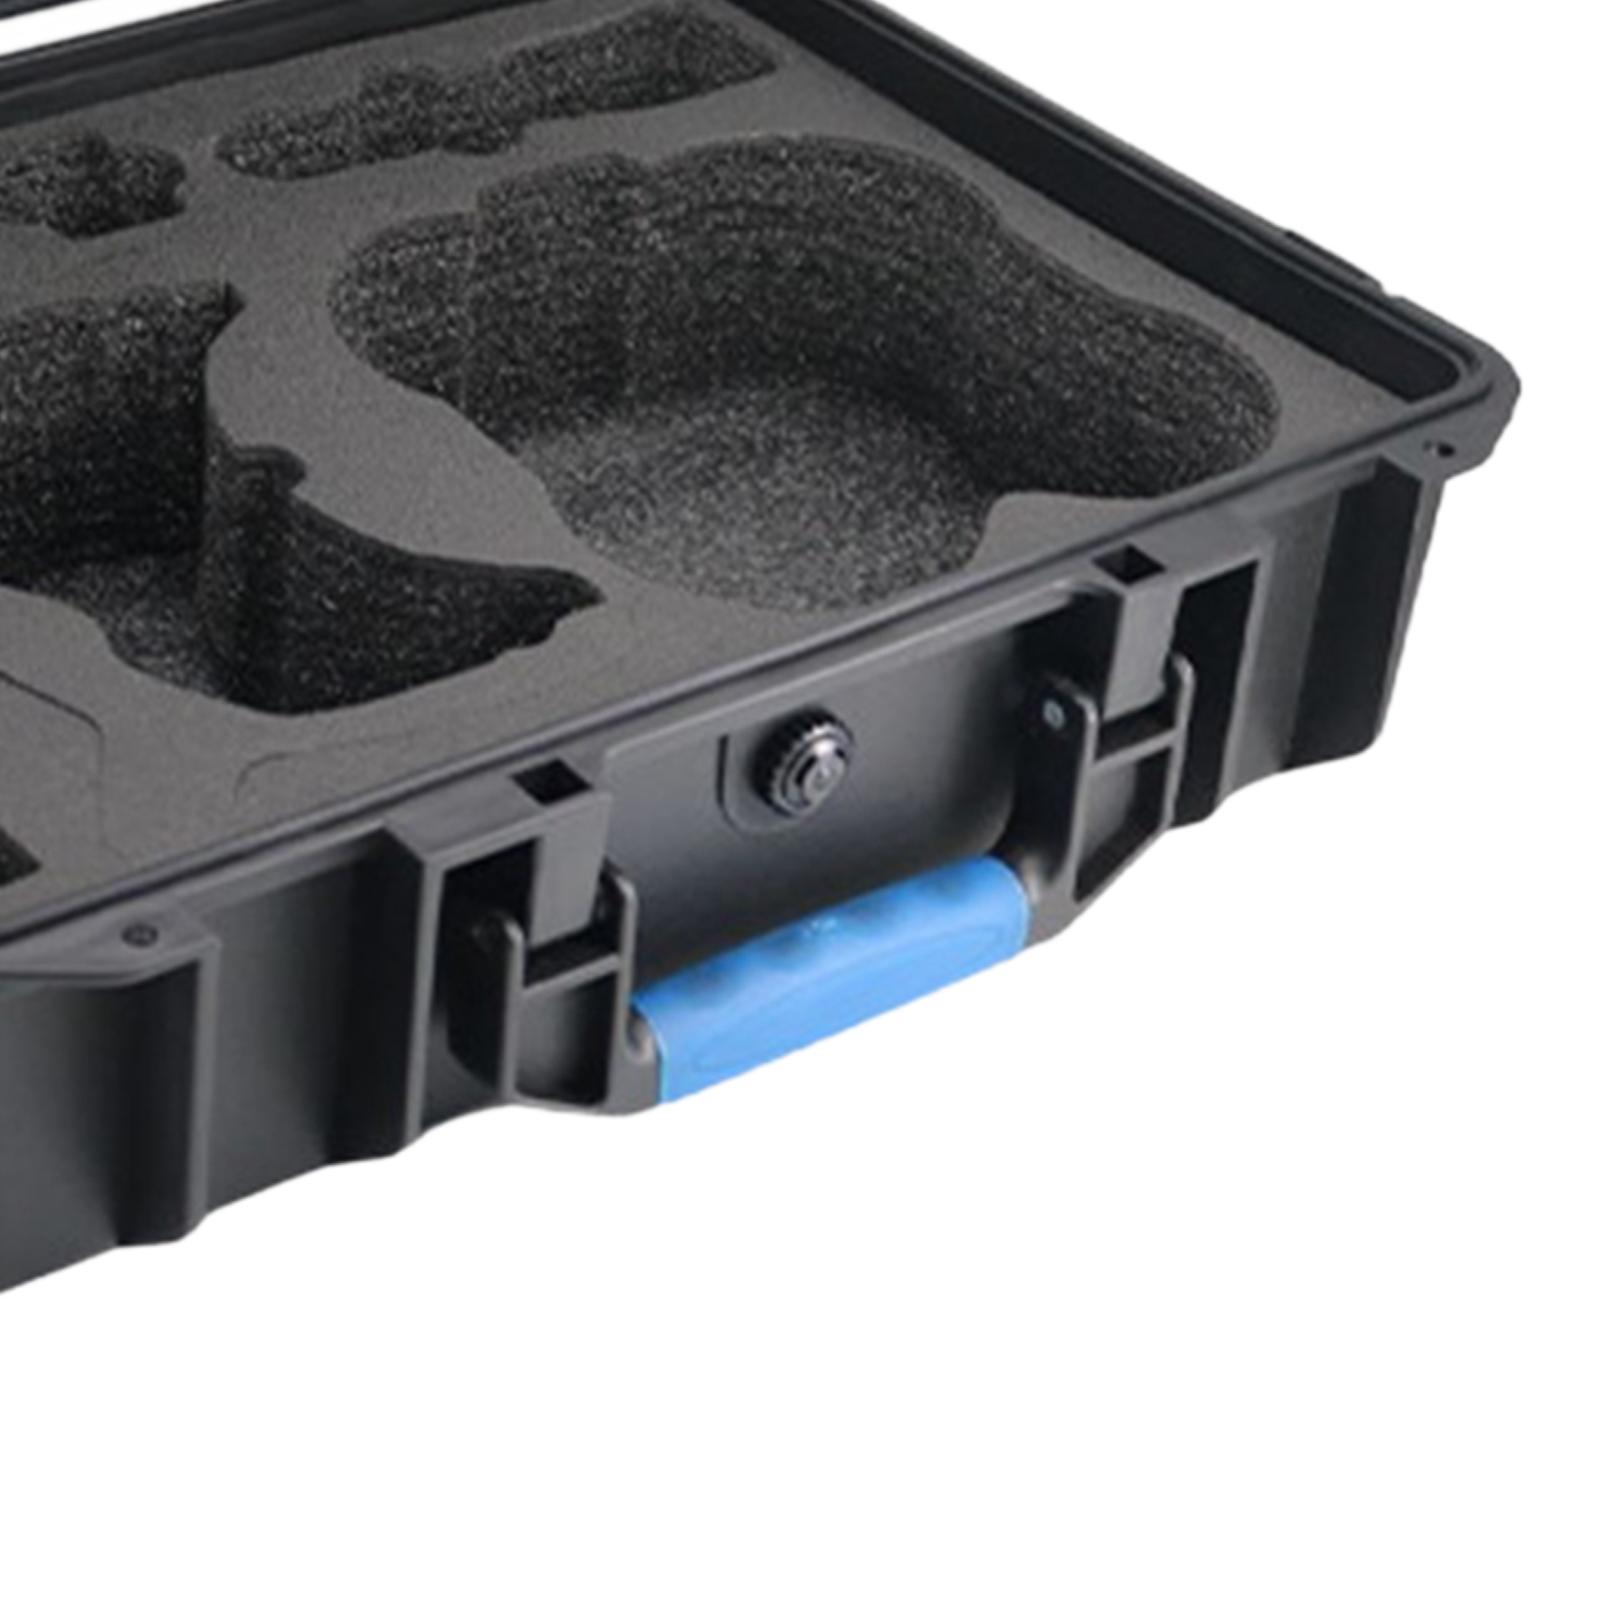 Waterproof Drone Carrying Case for Remote Control Quadcopter